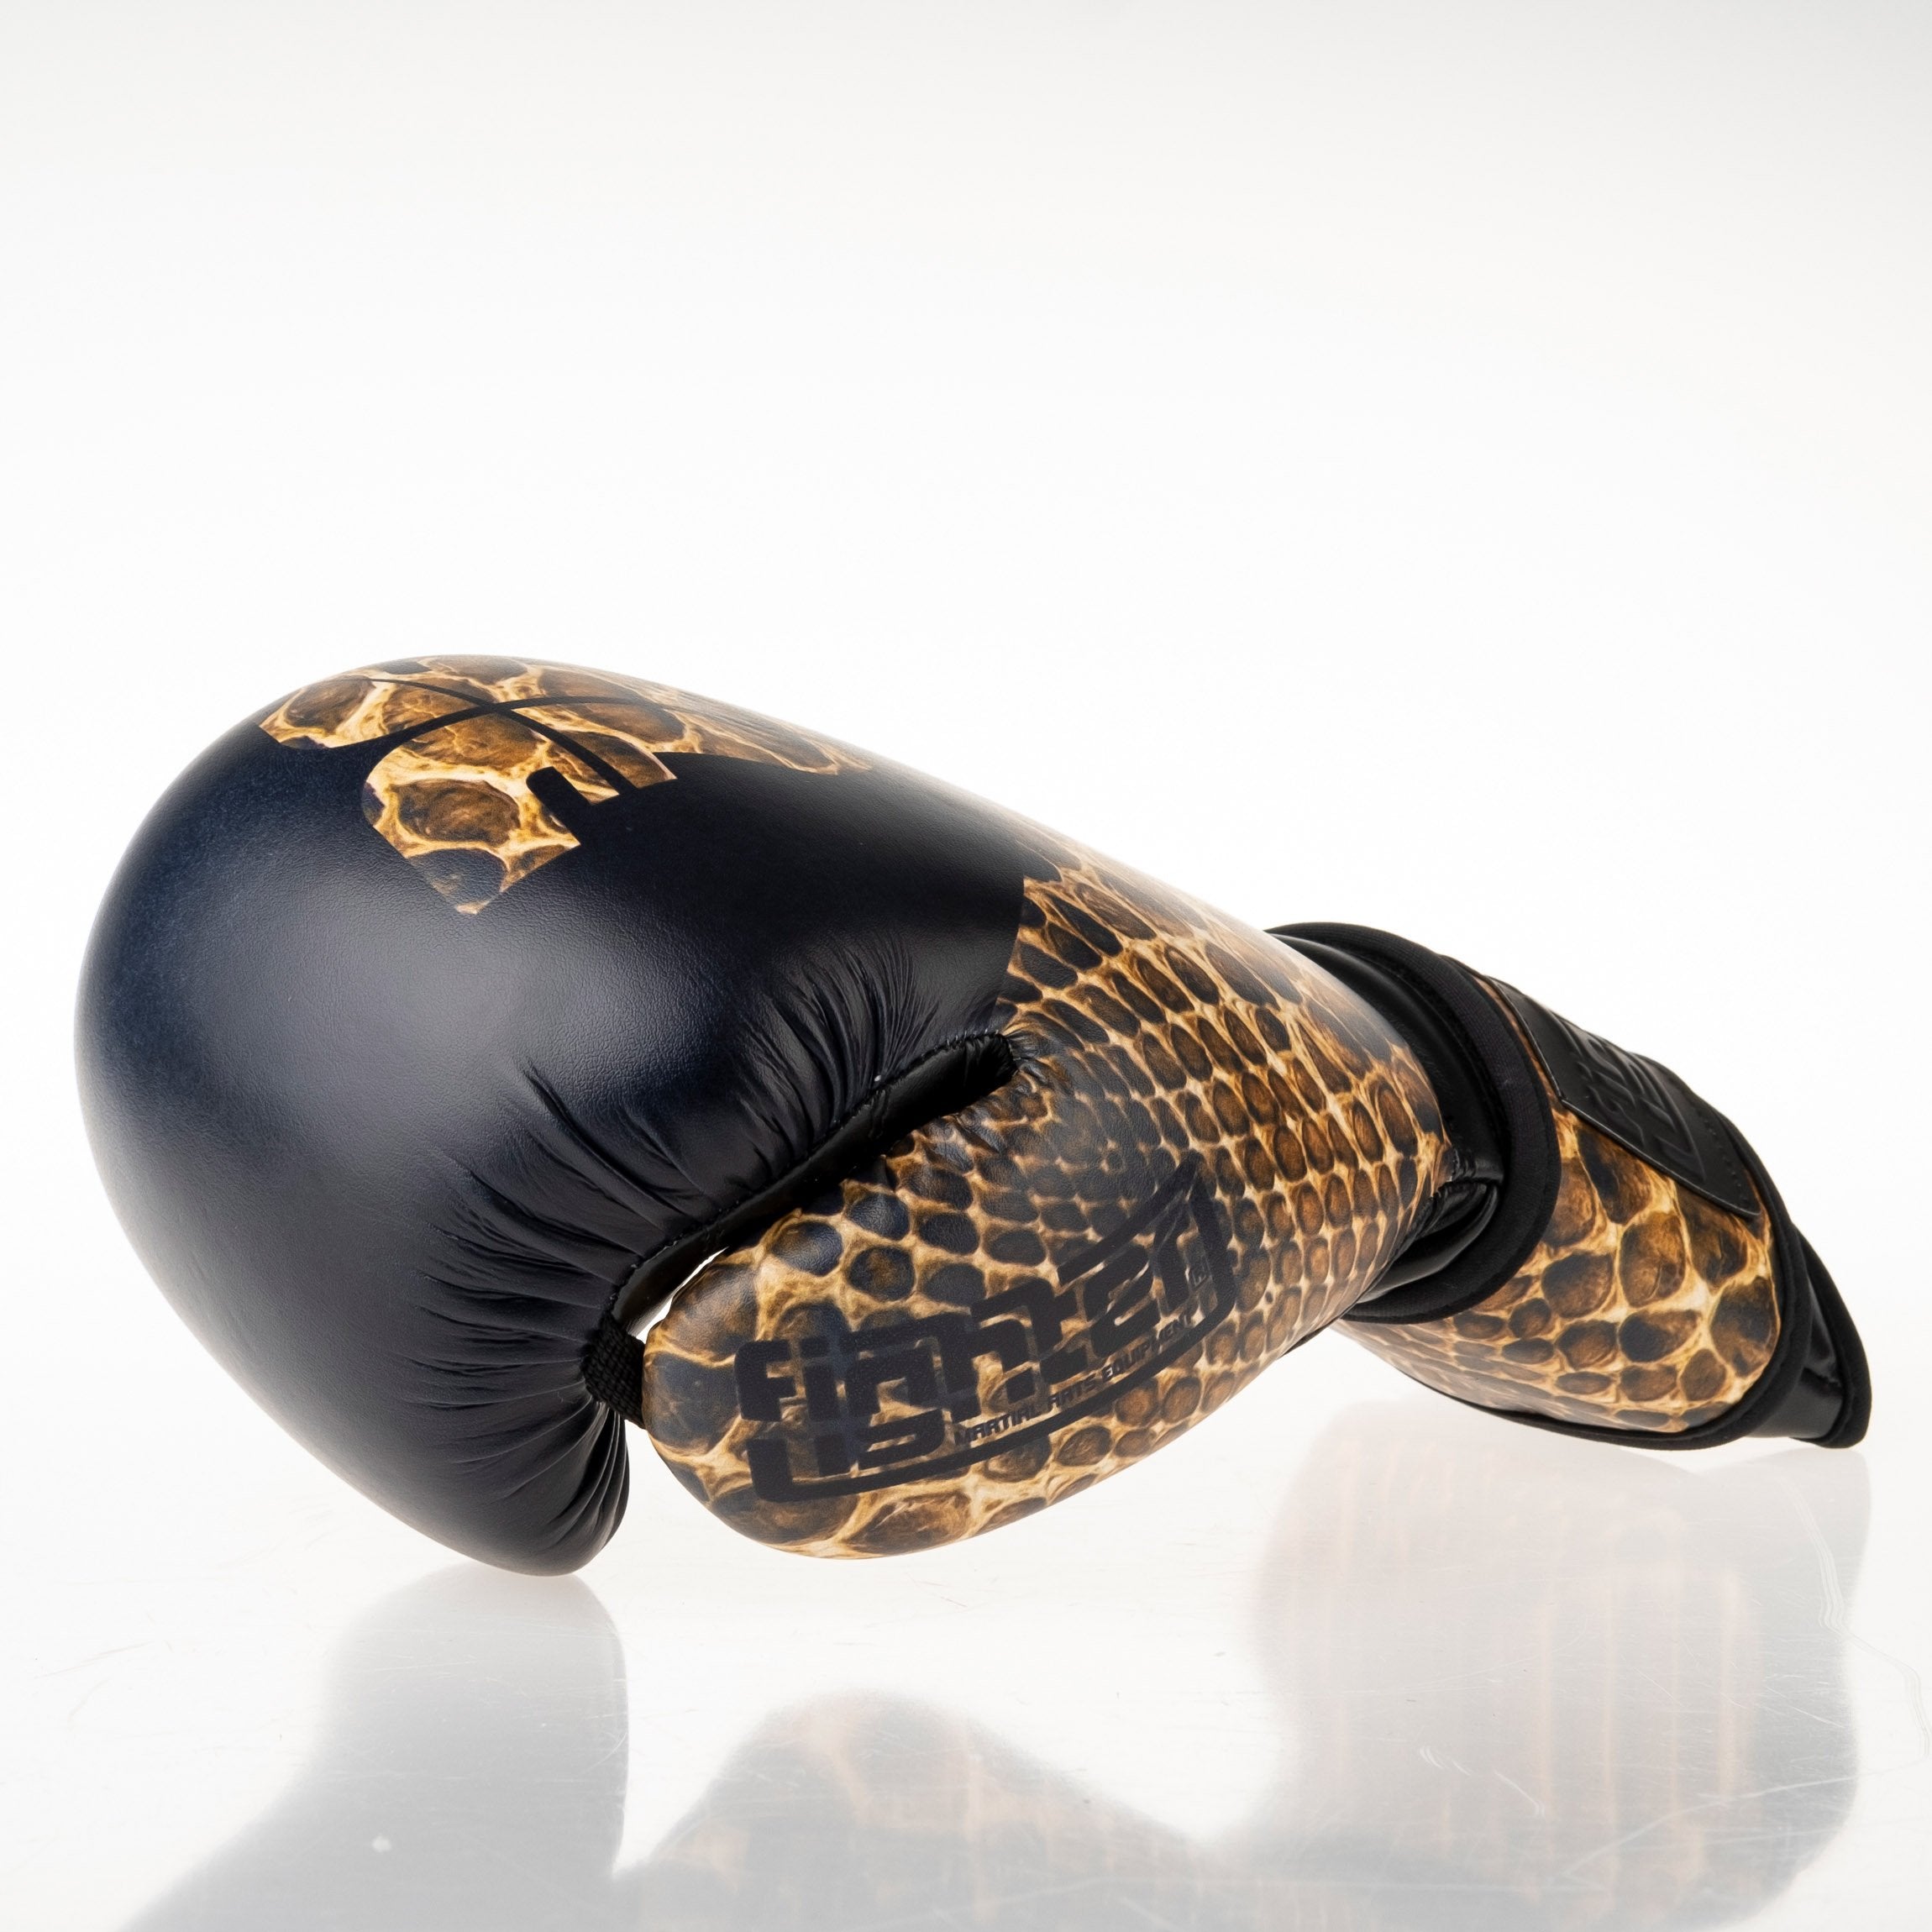 Fighter Boxing Gloves Jungle Series - snake